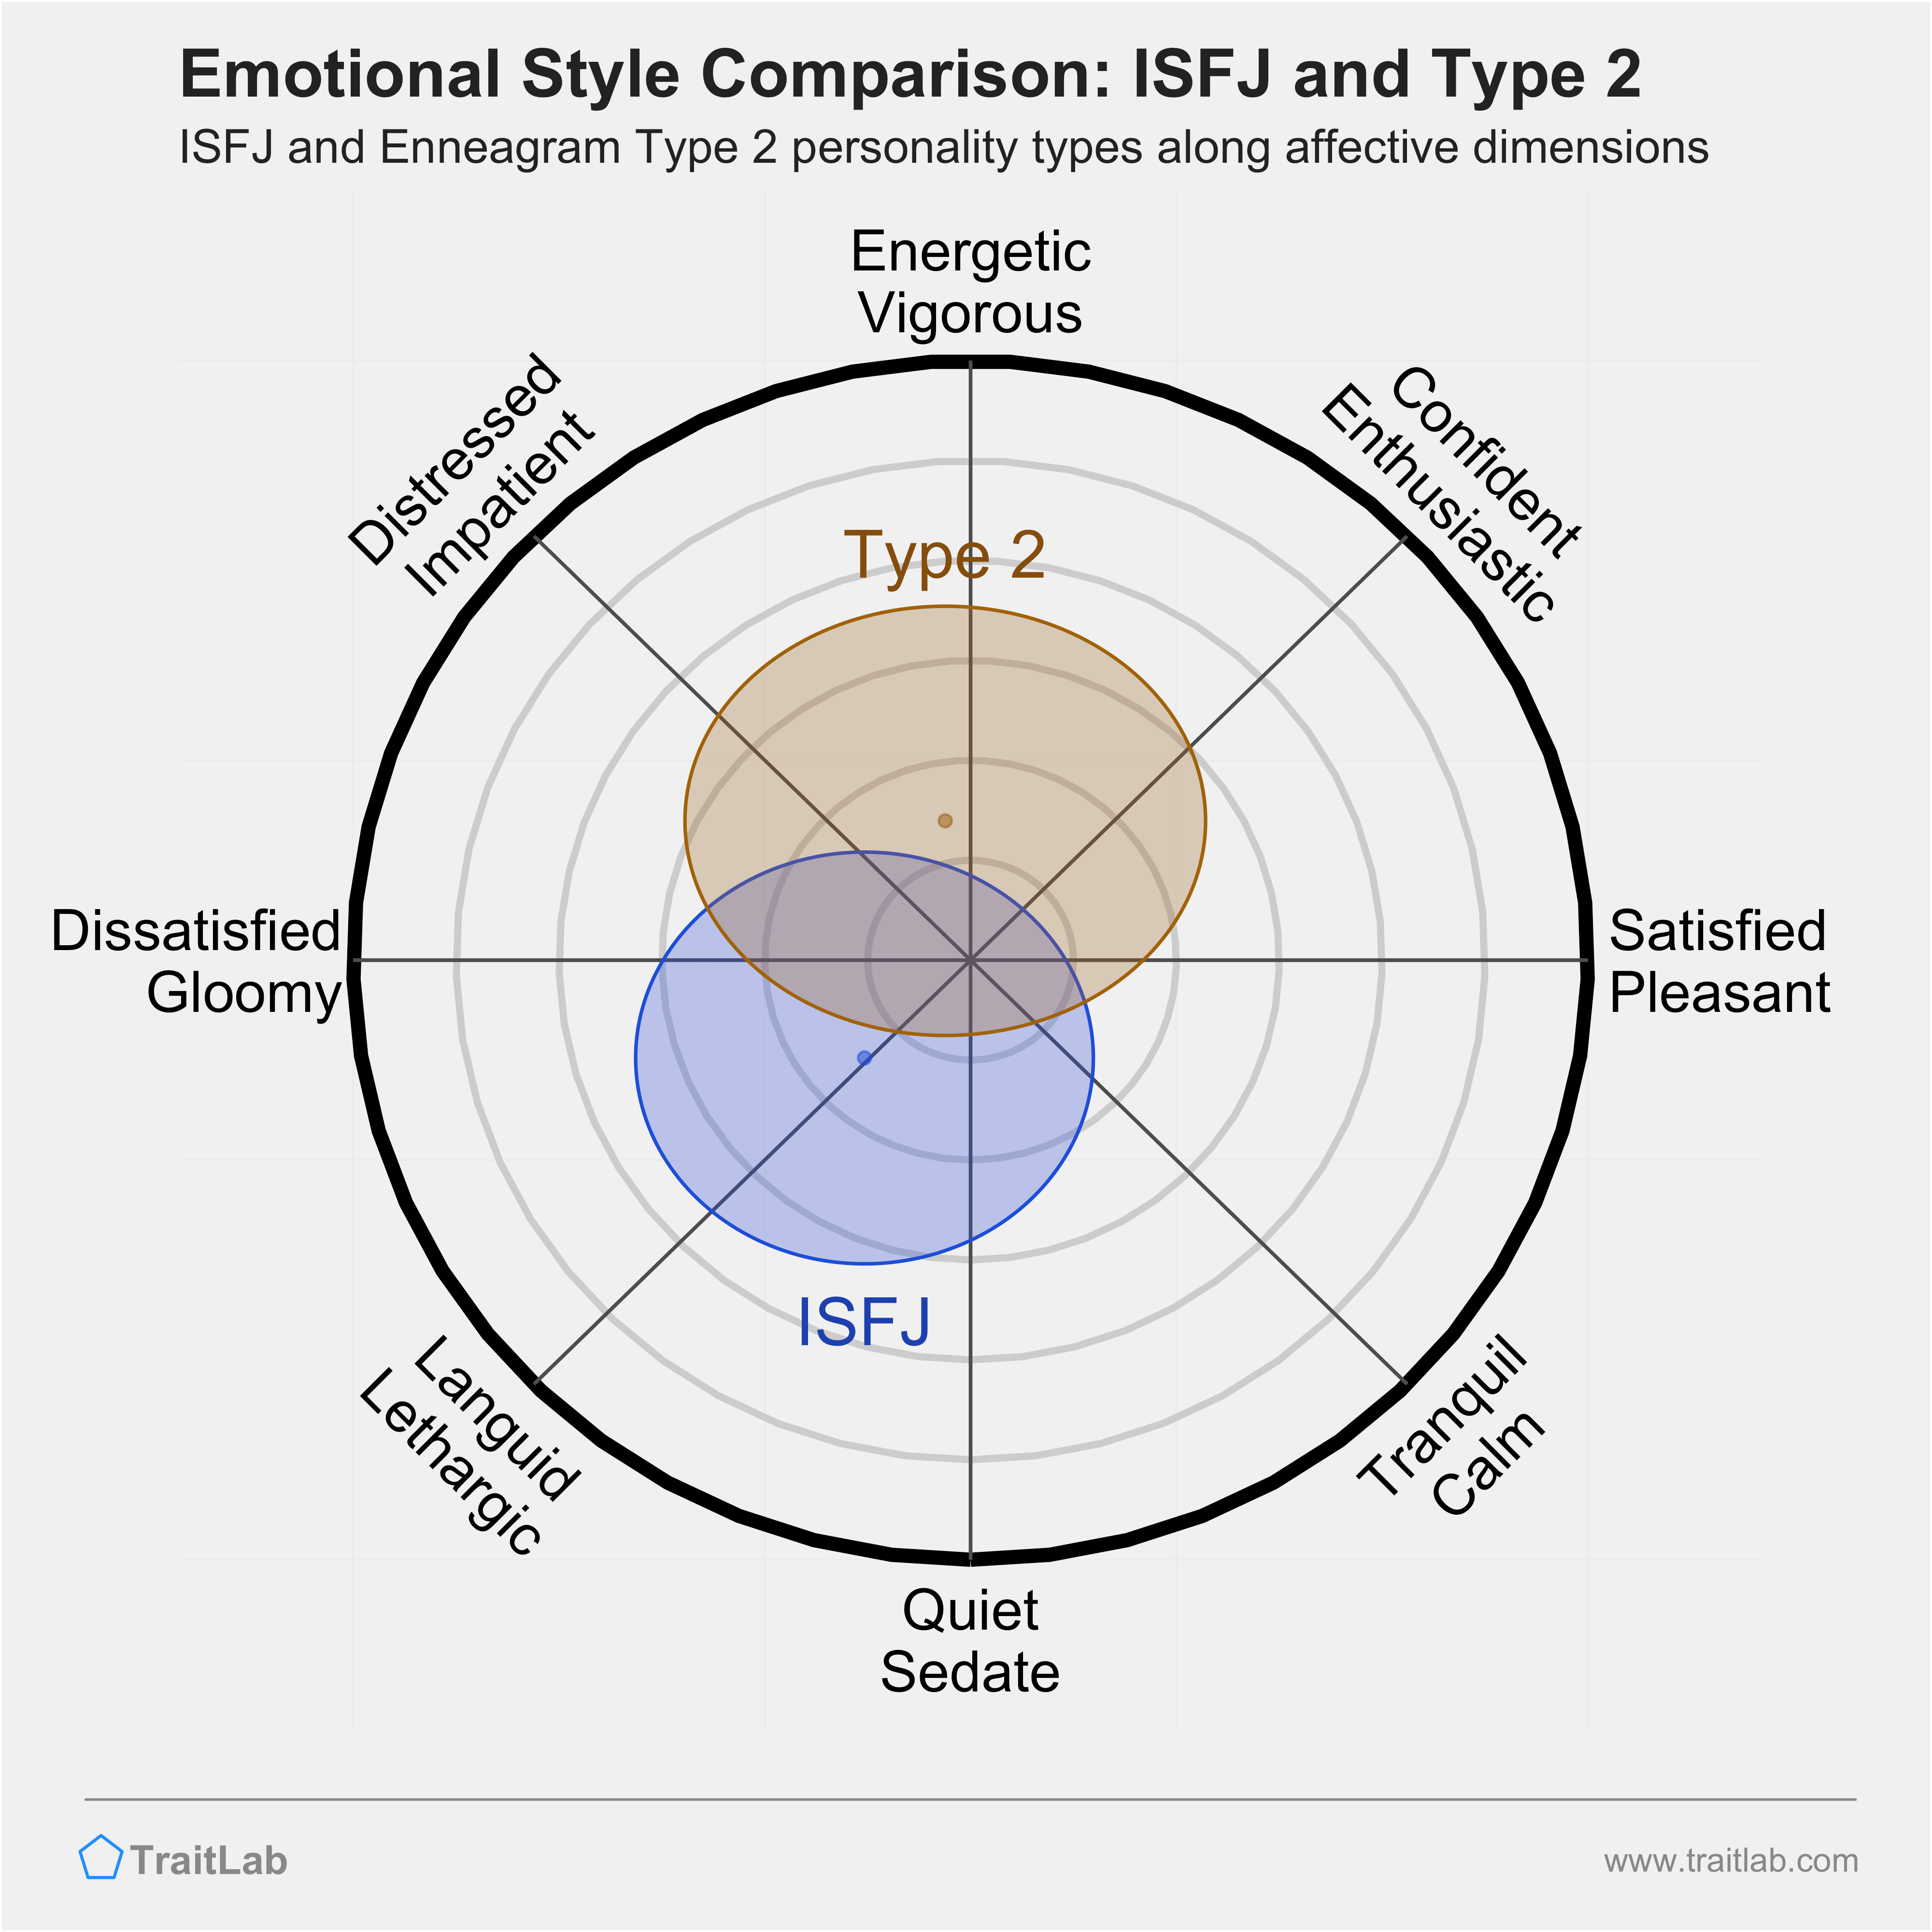 ISFJ and Type 2 comparison across emotional (affective) dimensions